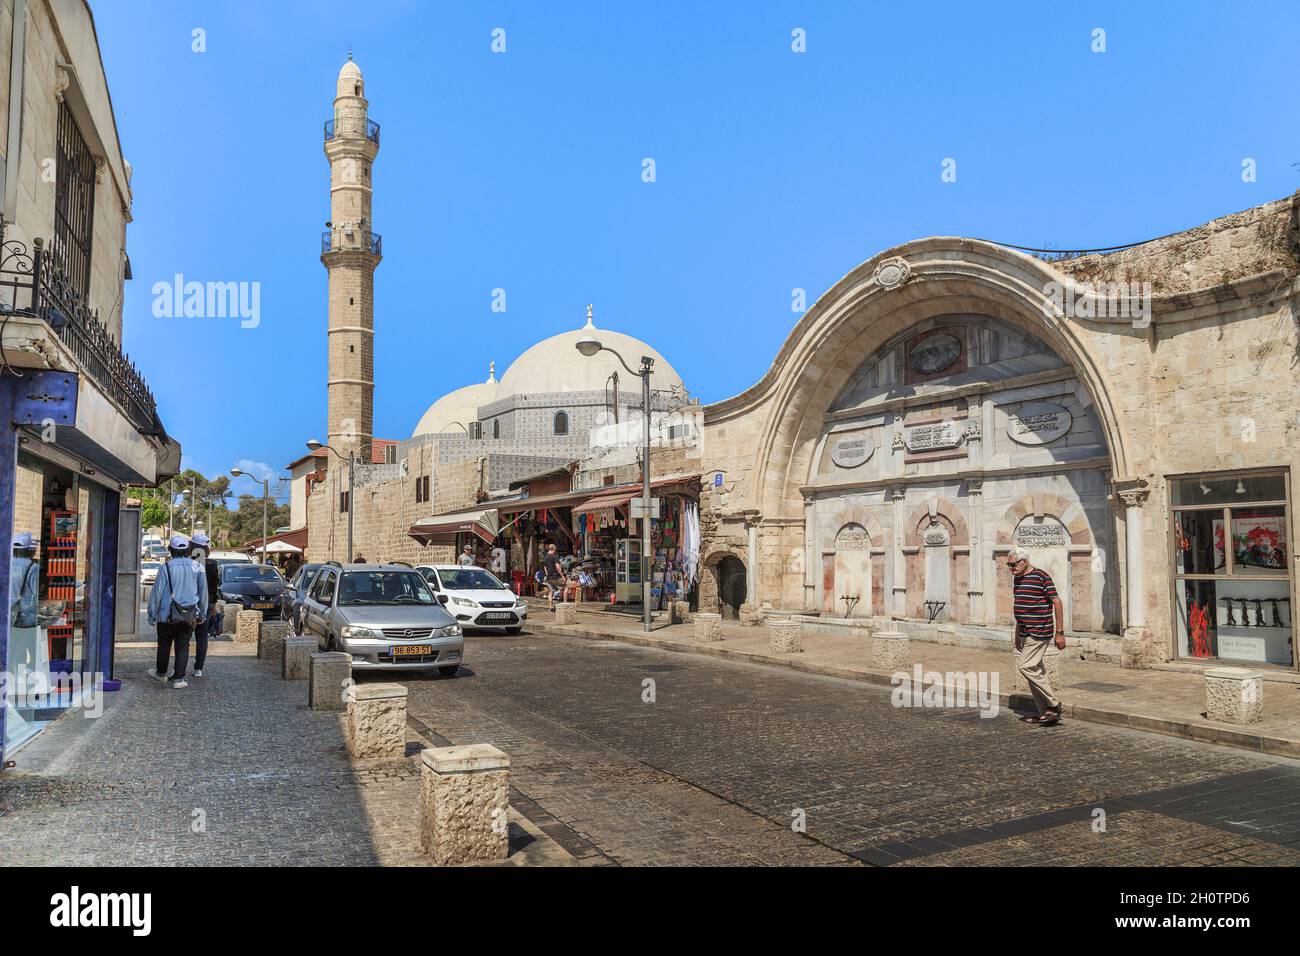 TEL AVIV, ISRAEL - SEPTEMBER 17, 2017: The Al Mahmudiya Mosque is the largest and most significant mosque in Jaffa. Stock Photo